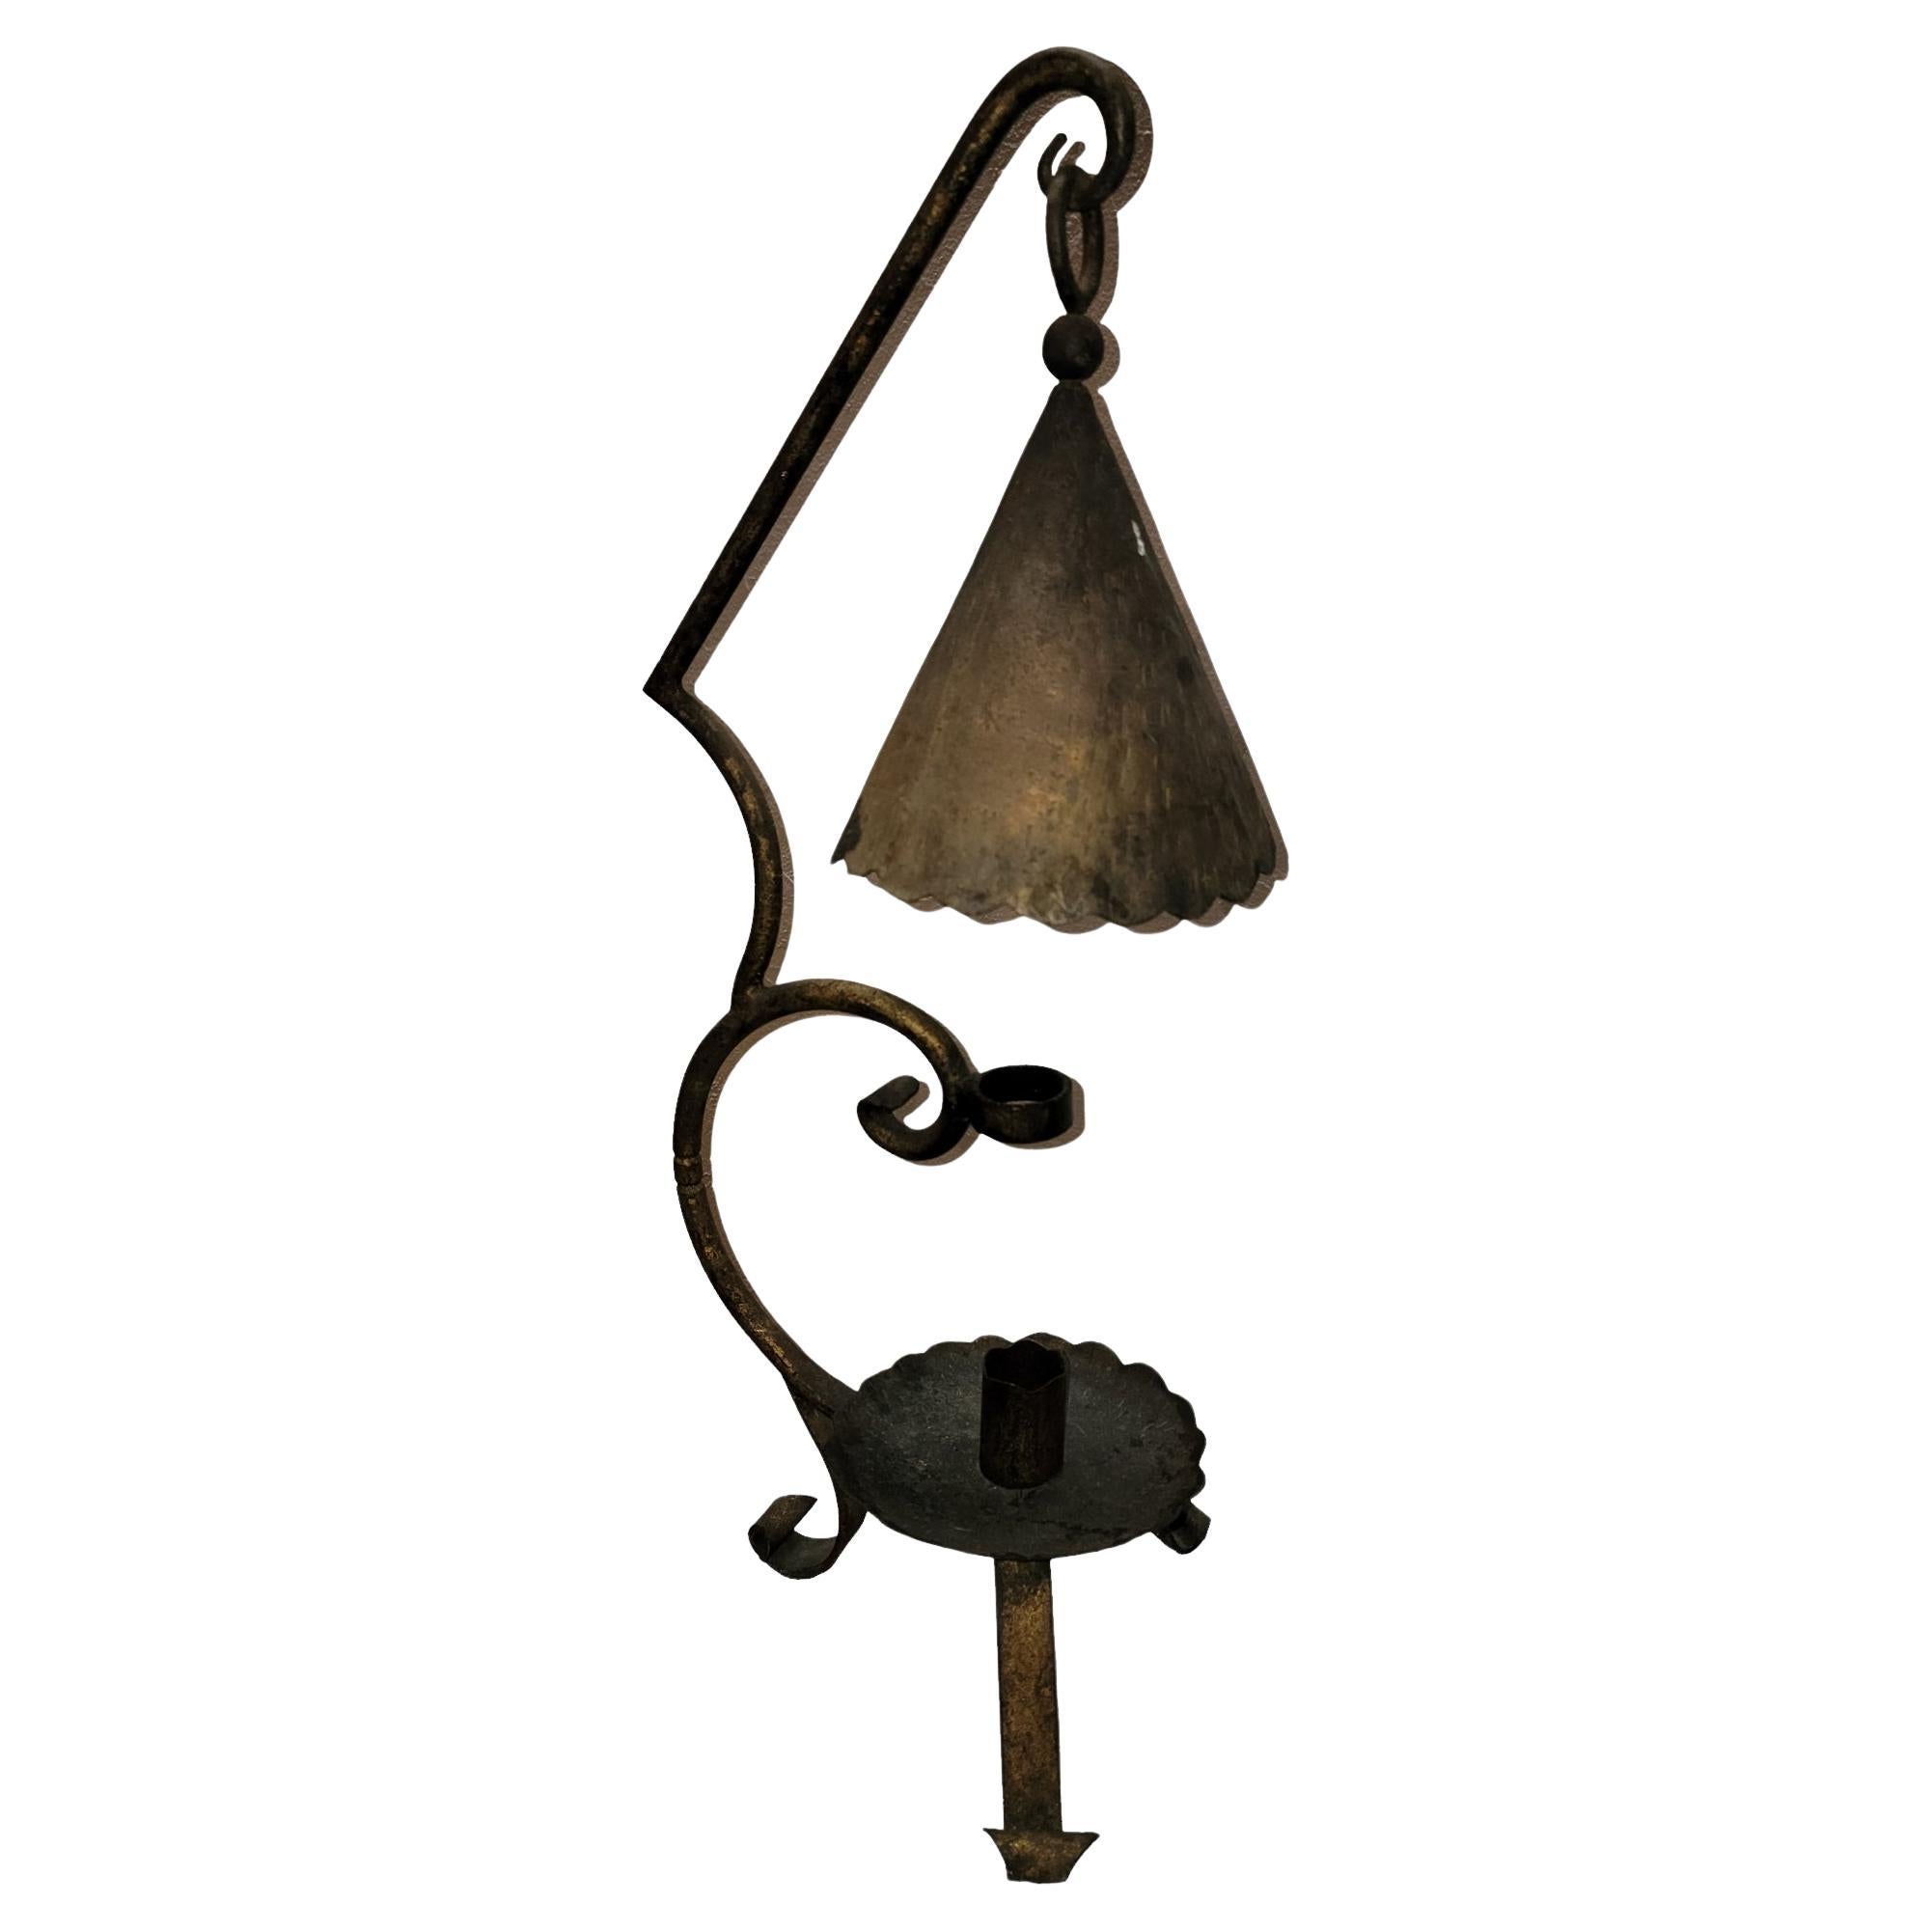 19thc Iron Candle Holder with hanging Diffuser